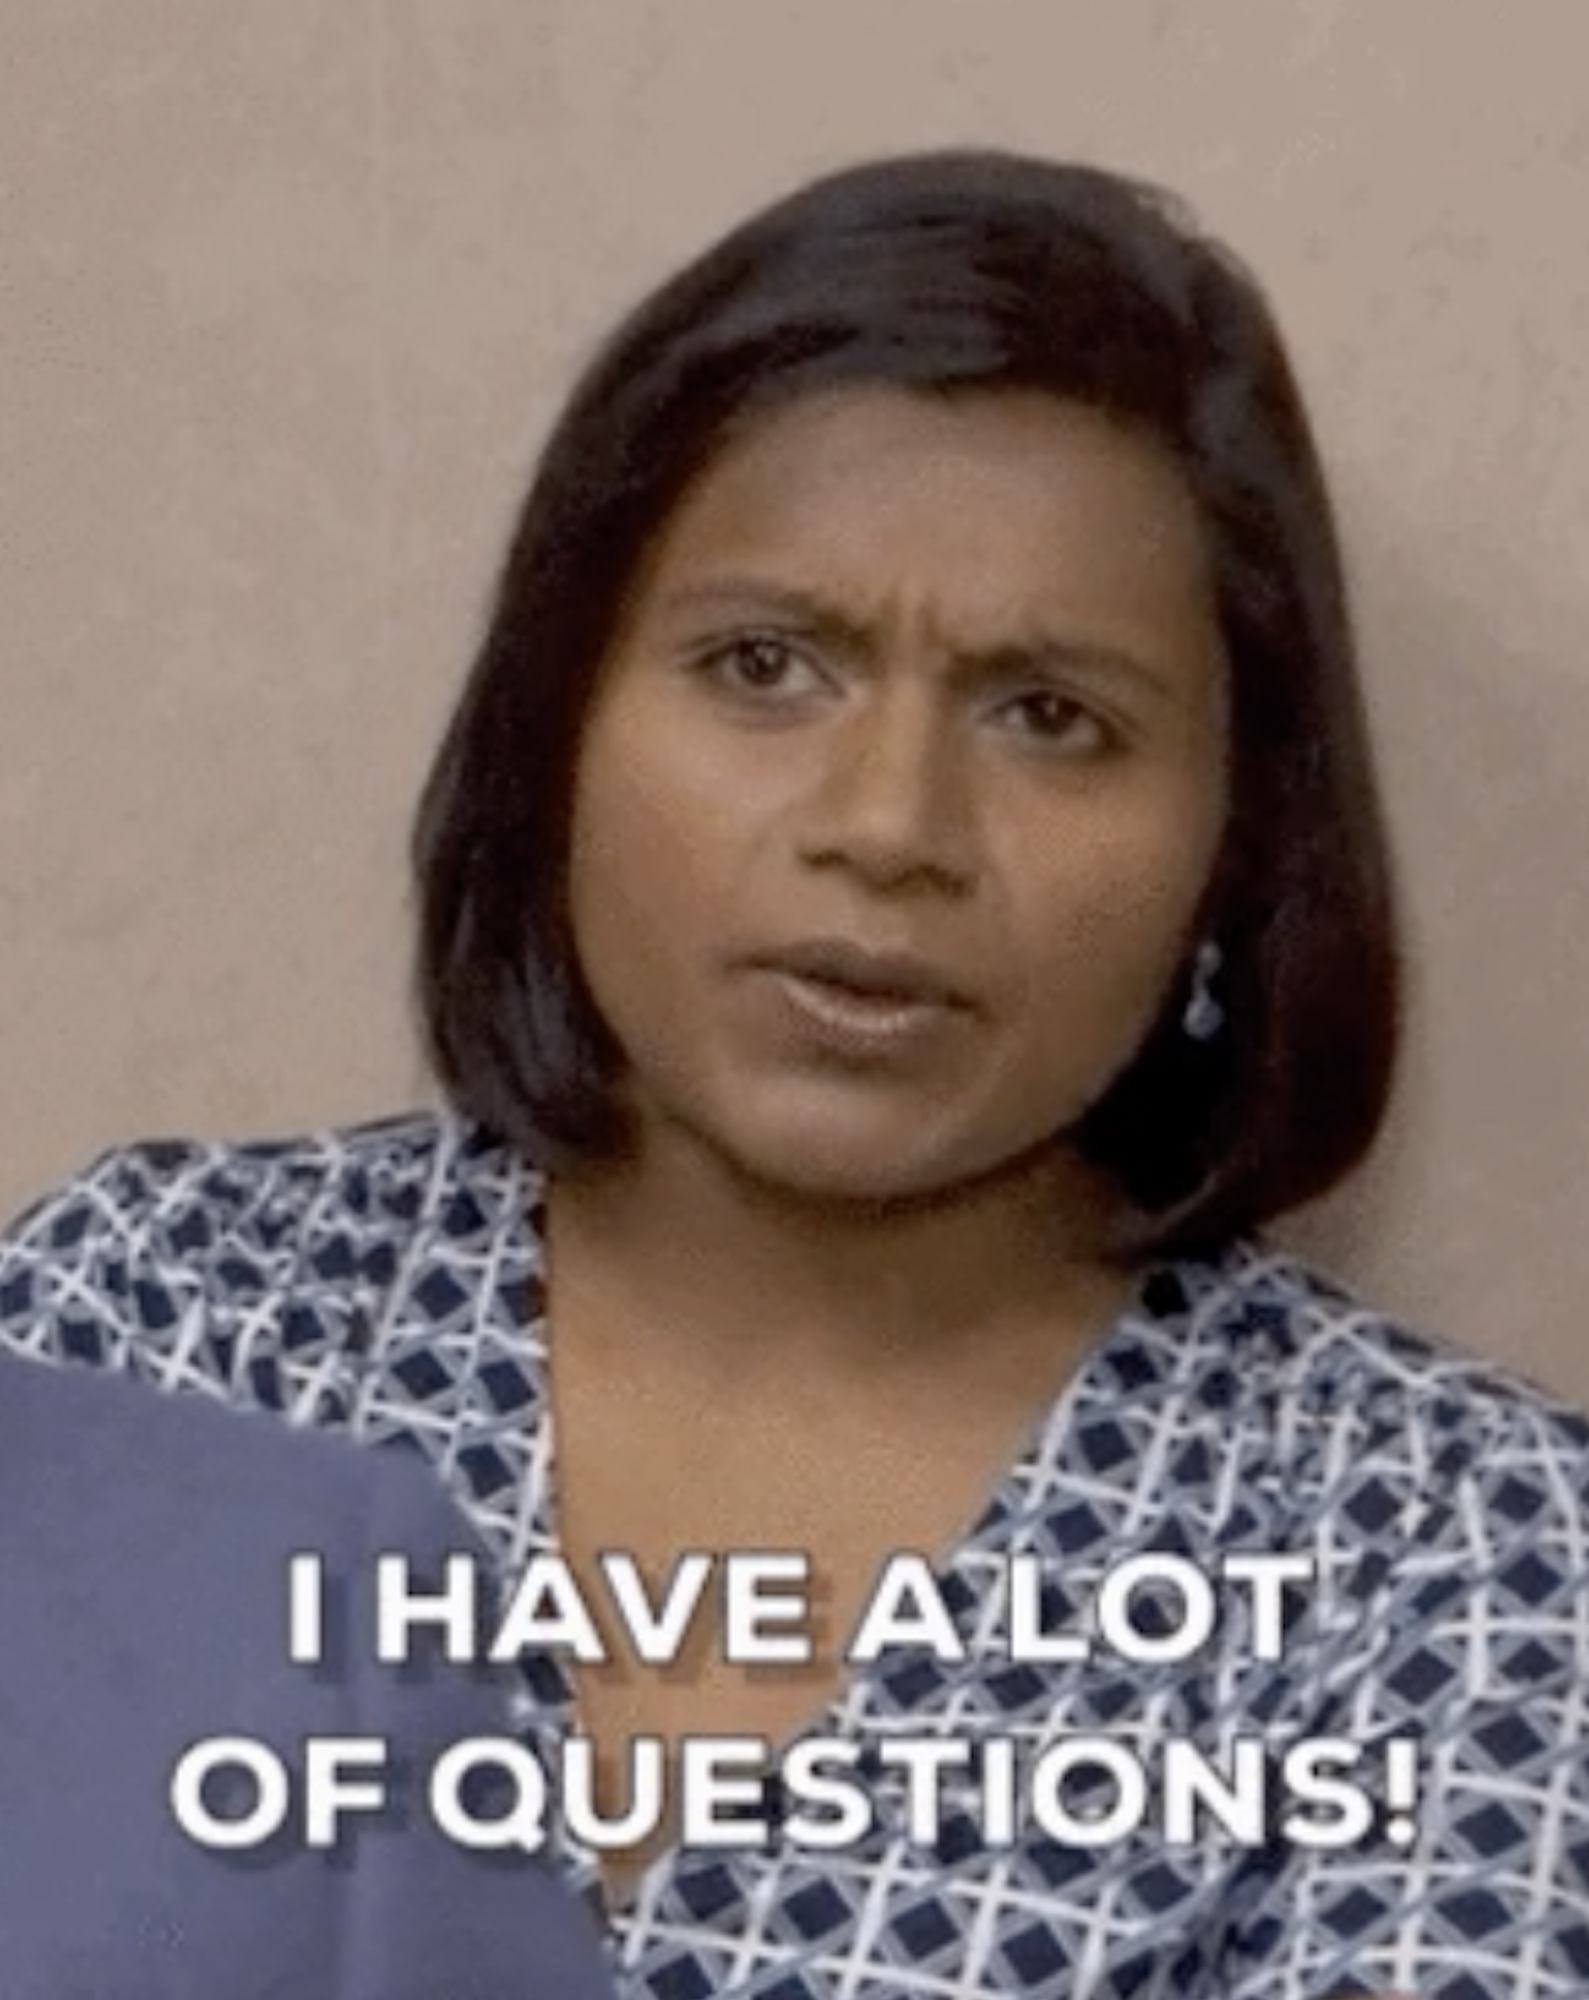 Mindy Kaling in &quot;The Office&quot; saying, &quot;I have a lot of questions!&quot;